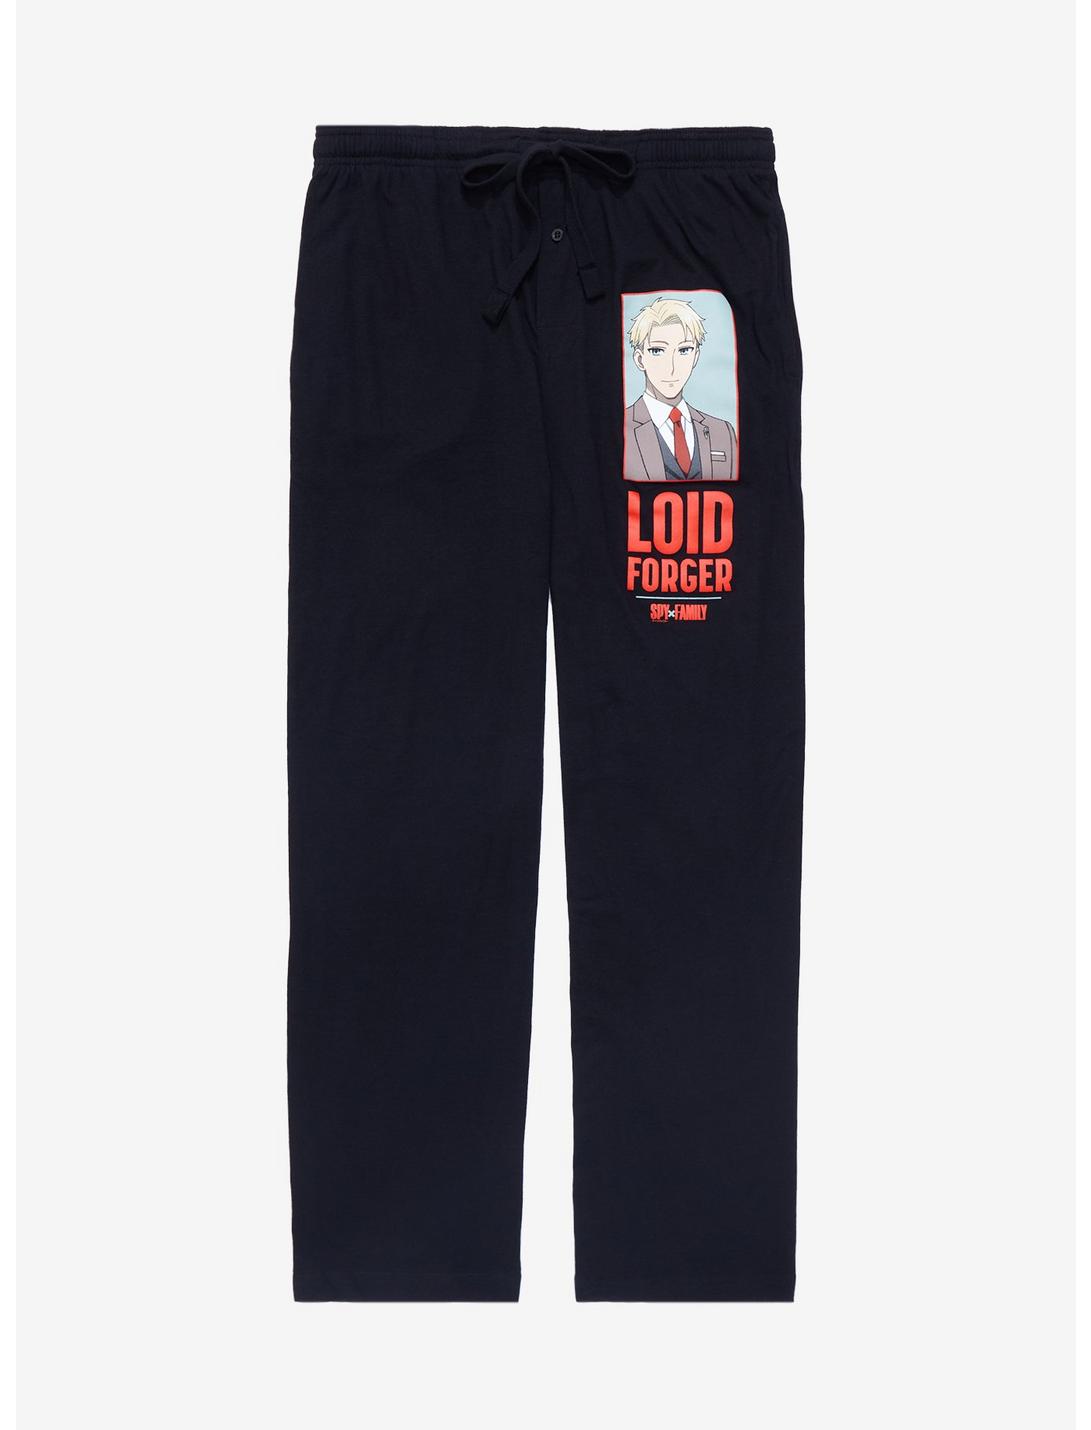 Spy x Family Loid Forger Quarter Panel Sleep Pants - BoxLunch Exclusive, BLACK, hi-res